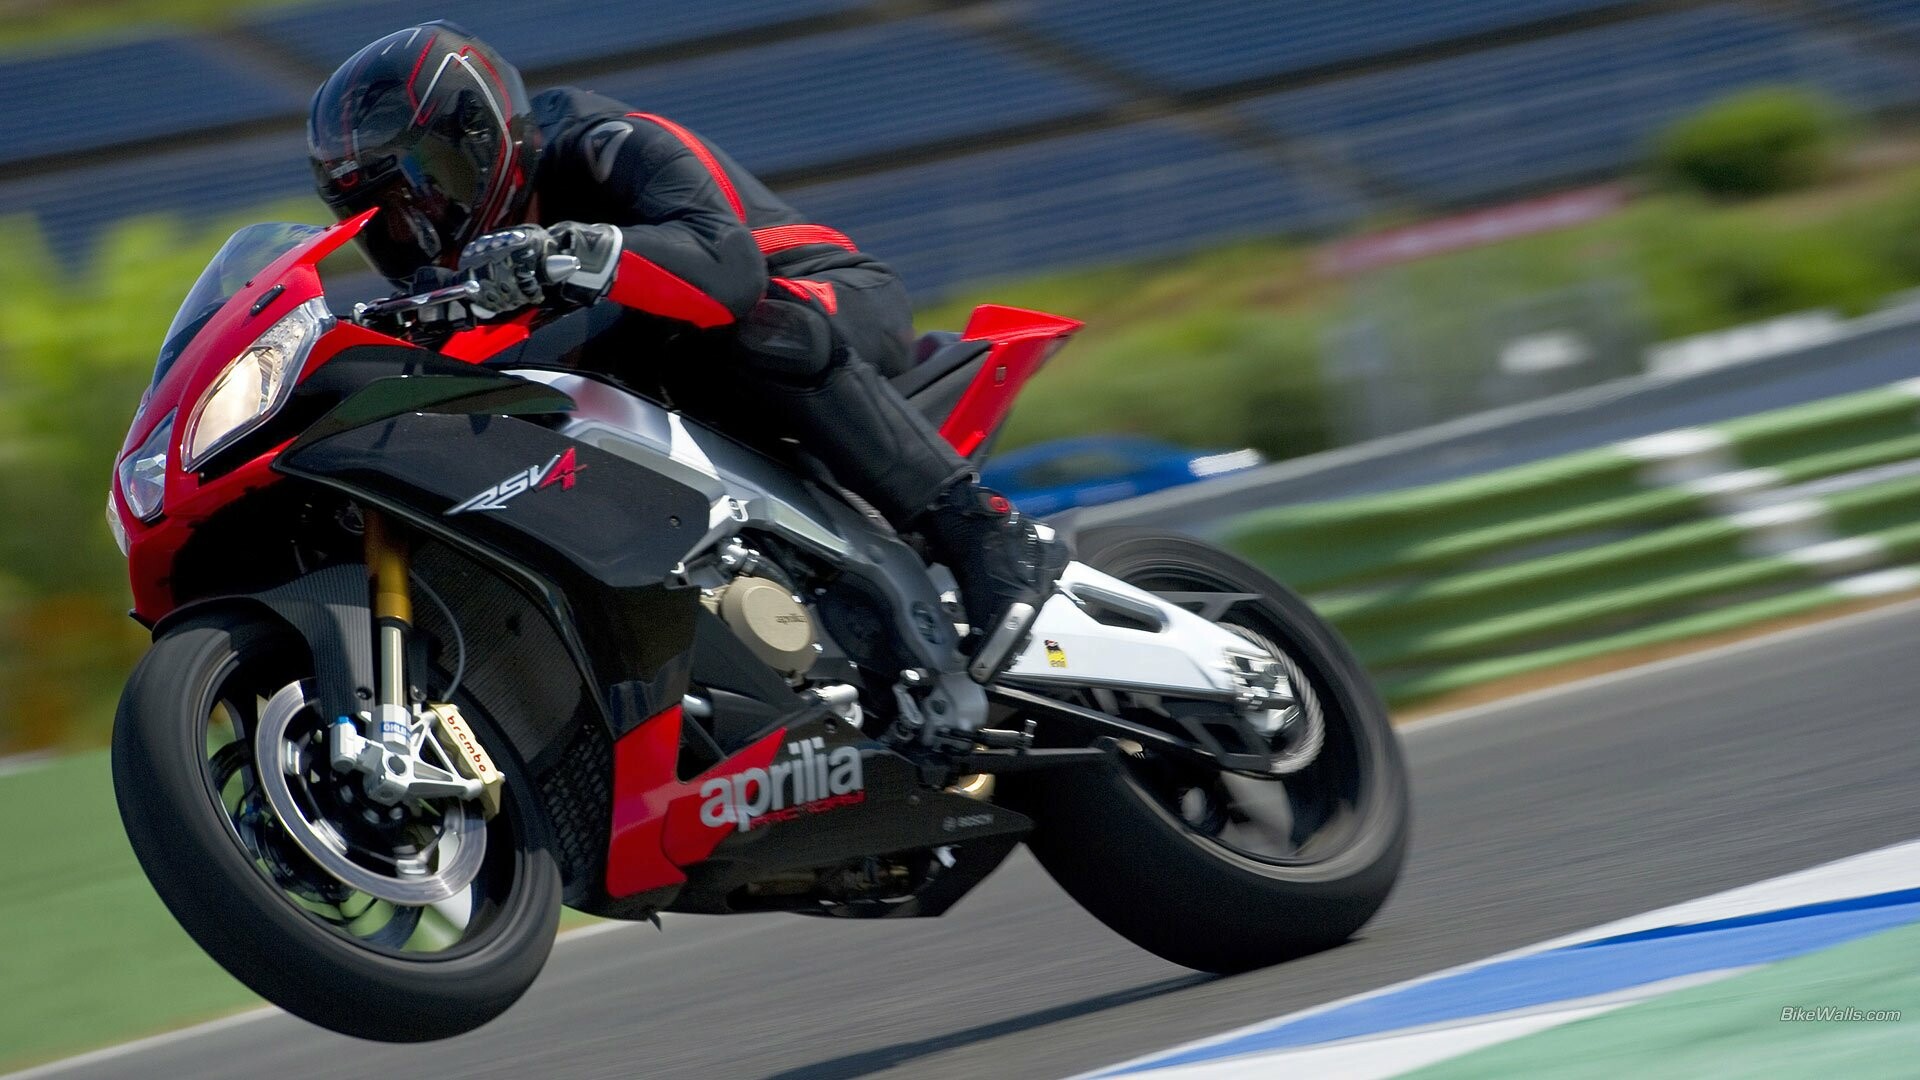 Aprilia: RSV4, Designed by Italian manufacturer, A part of the Piaggio Group. 1920x1080 Full HD Background.